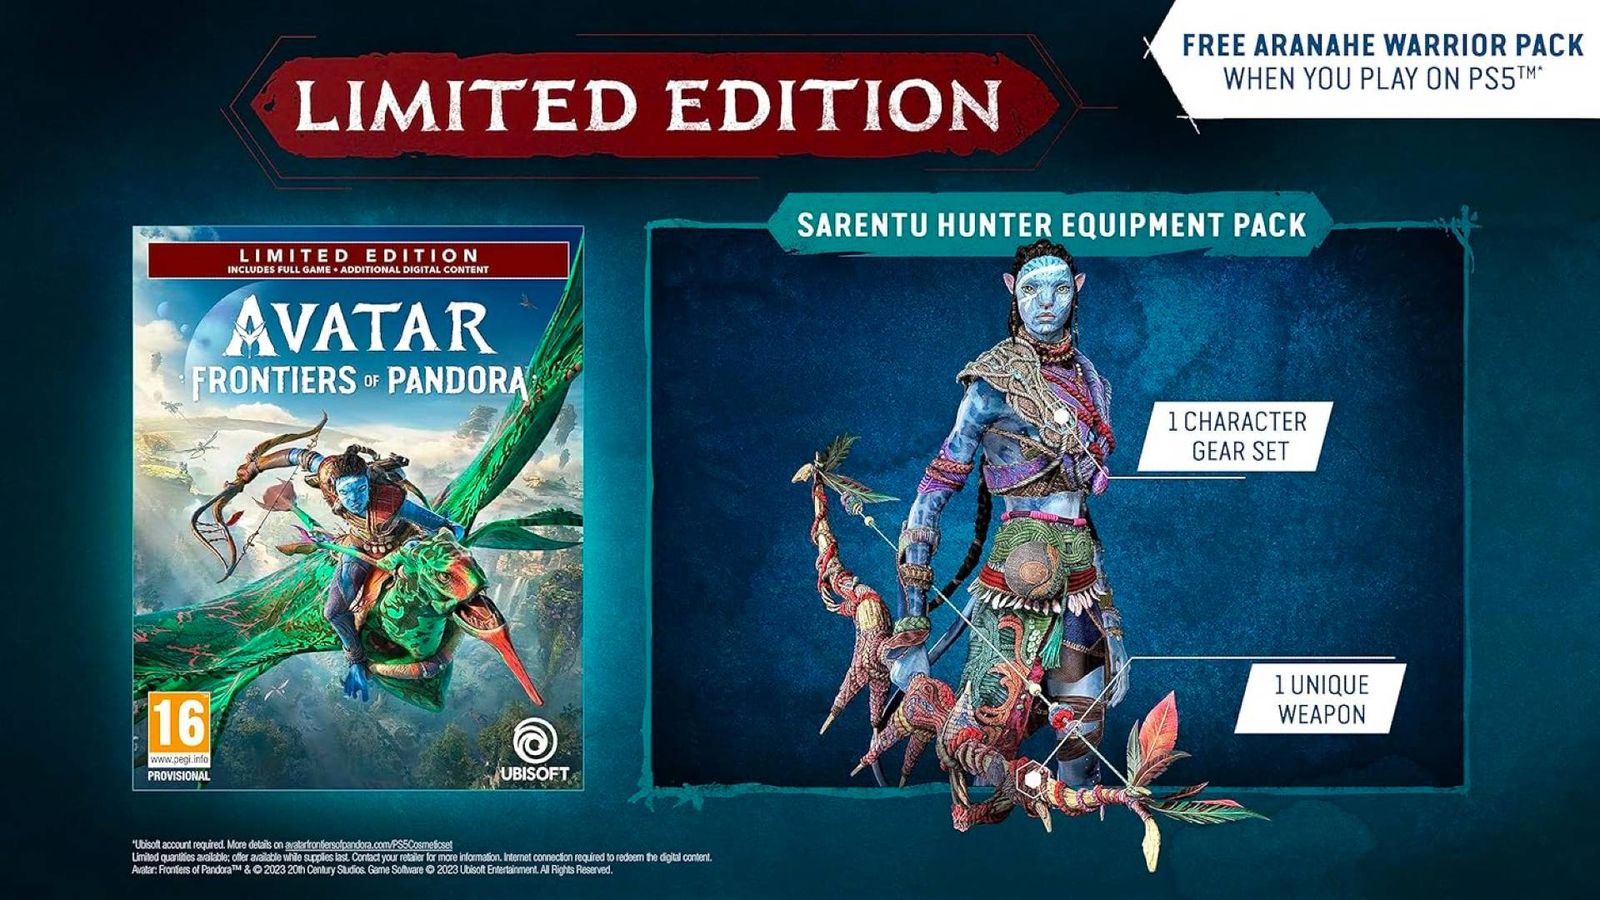 Image of the Limited Edition bonuses in Avatar Frontiers of Pandora.